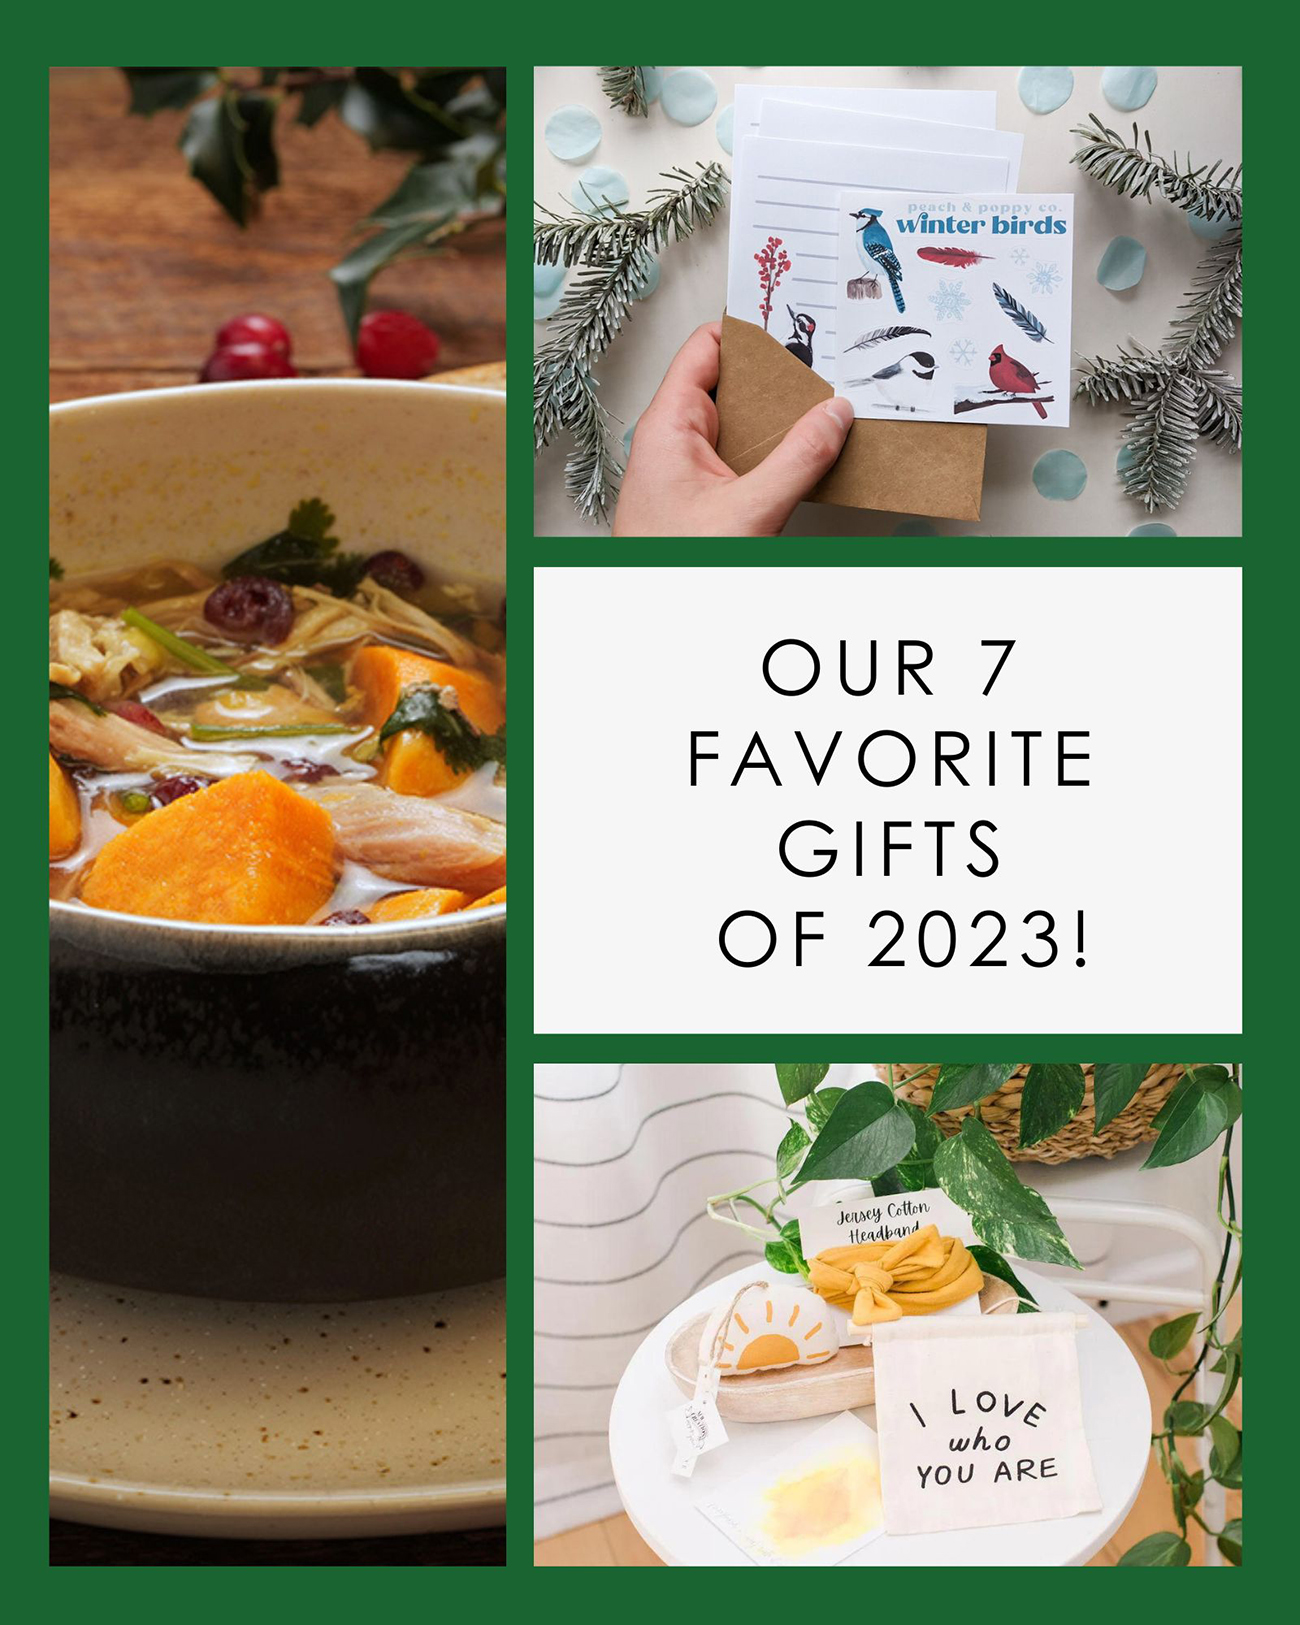 Our 7 Favorite Gifts of 2023